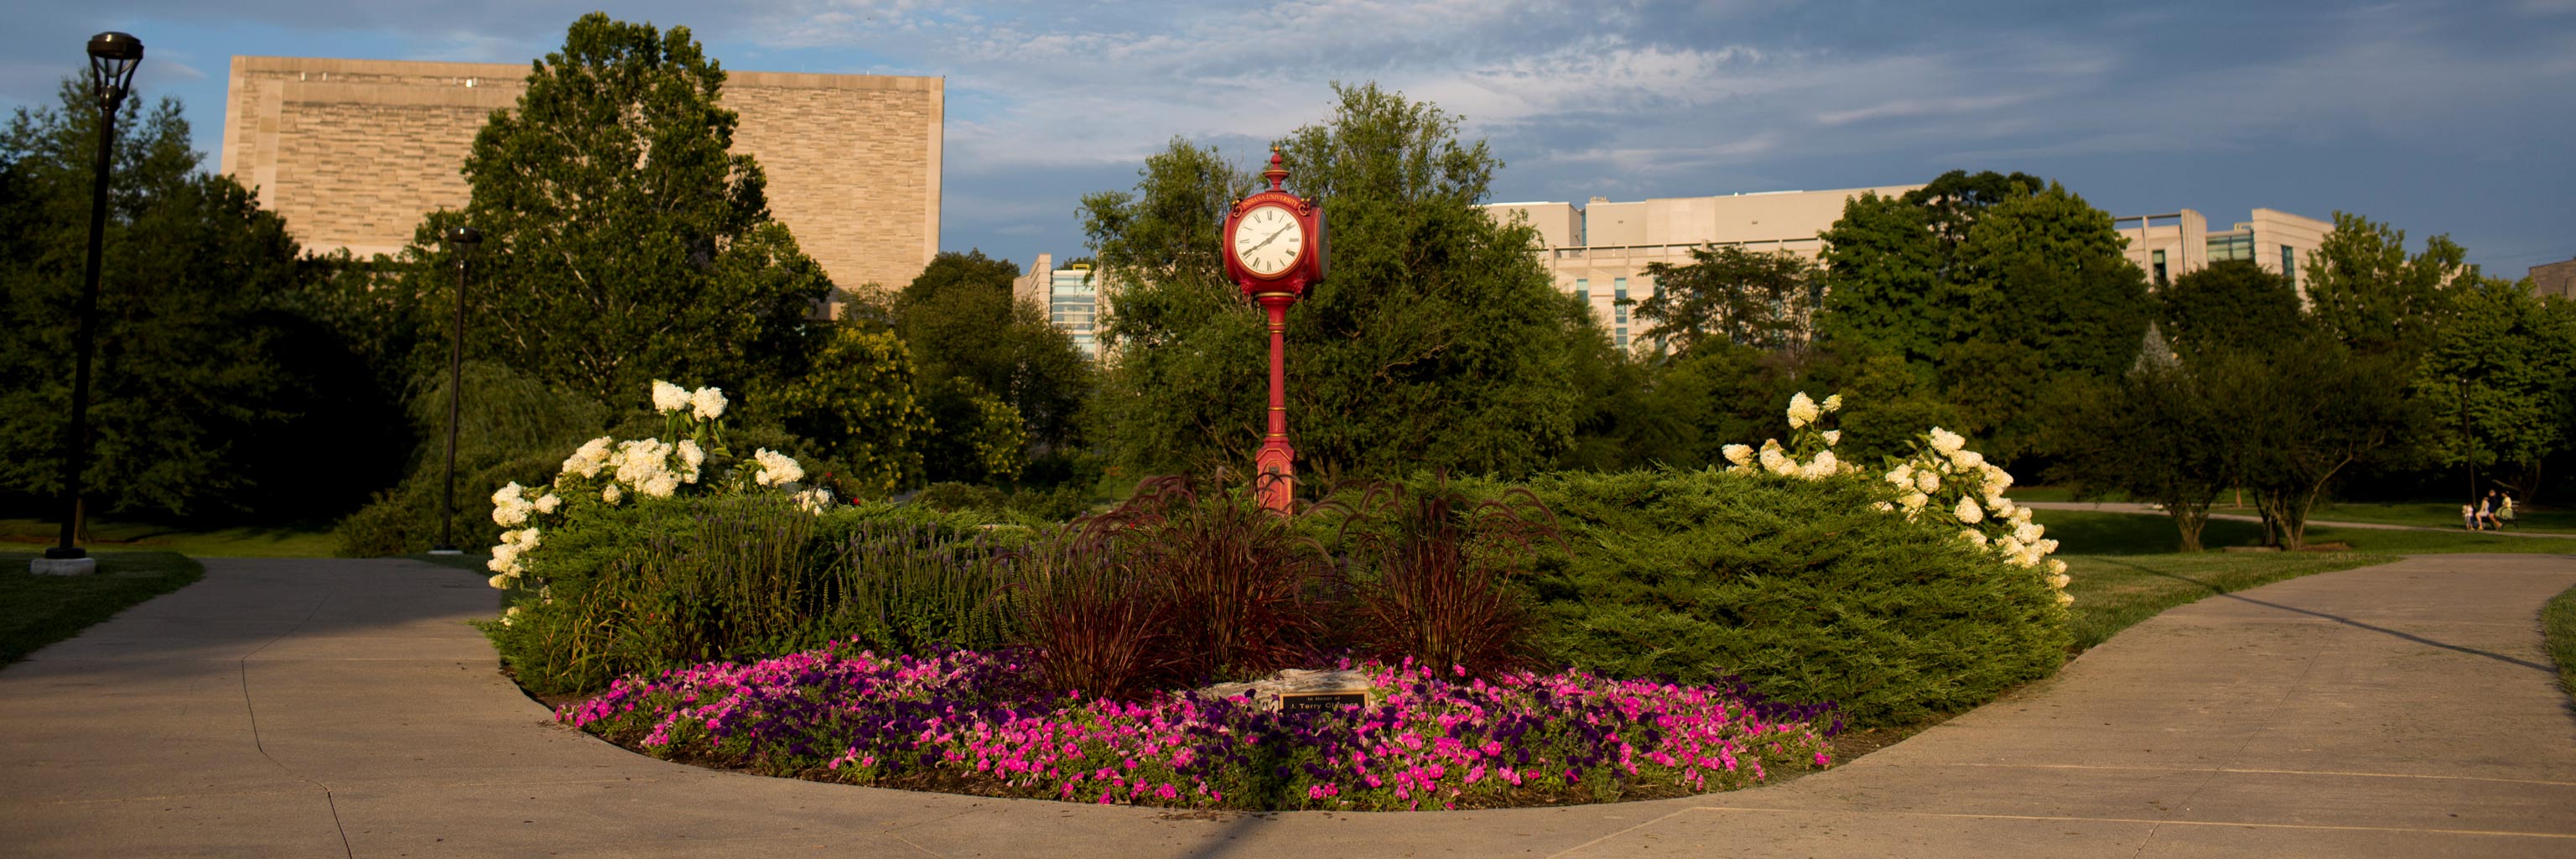 red clock on campus